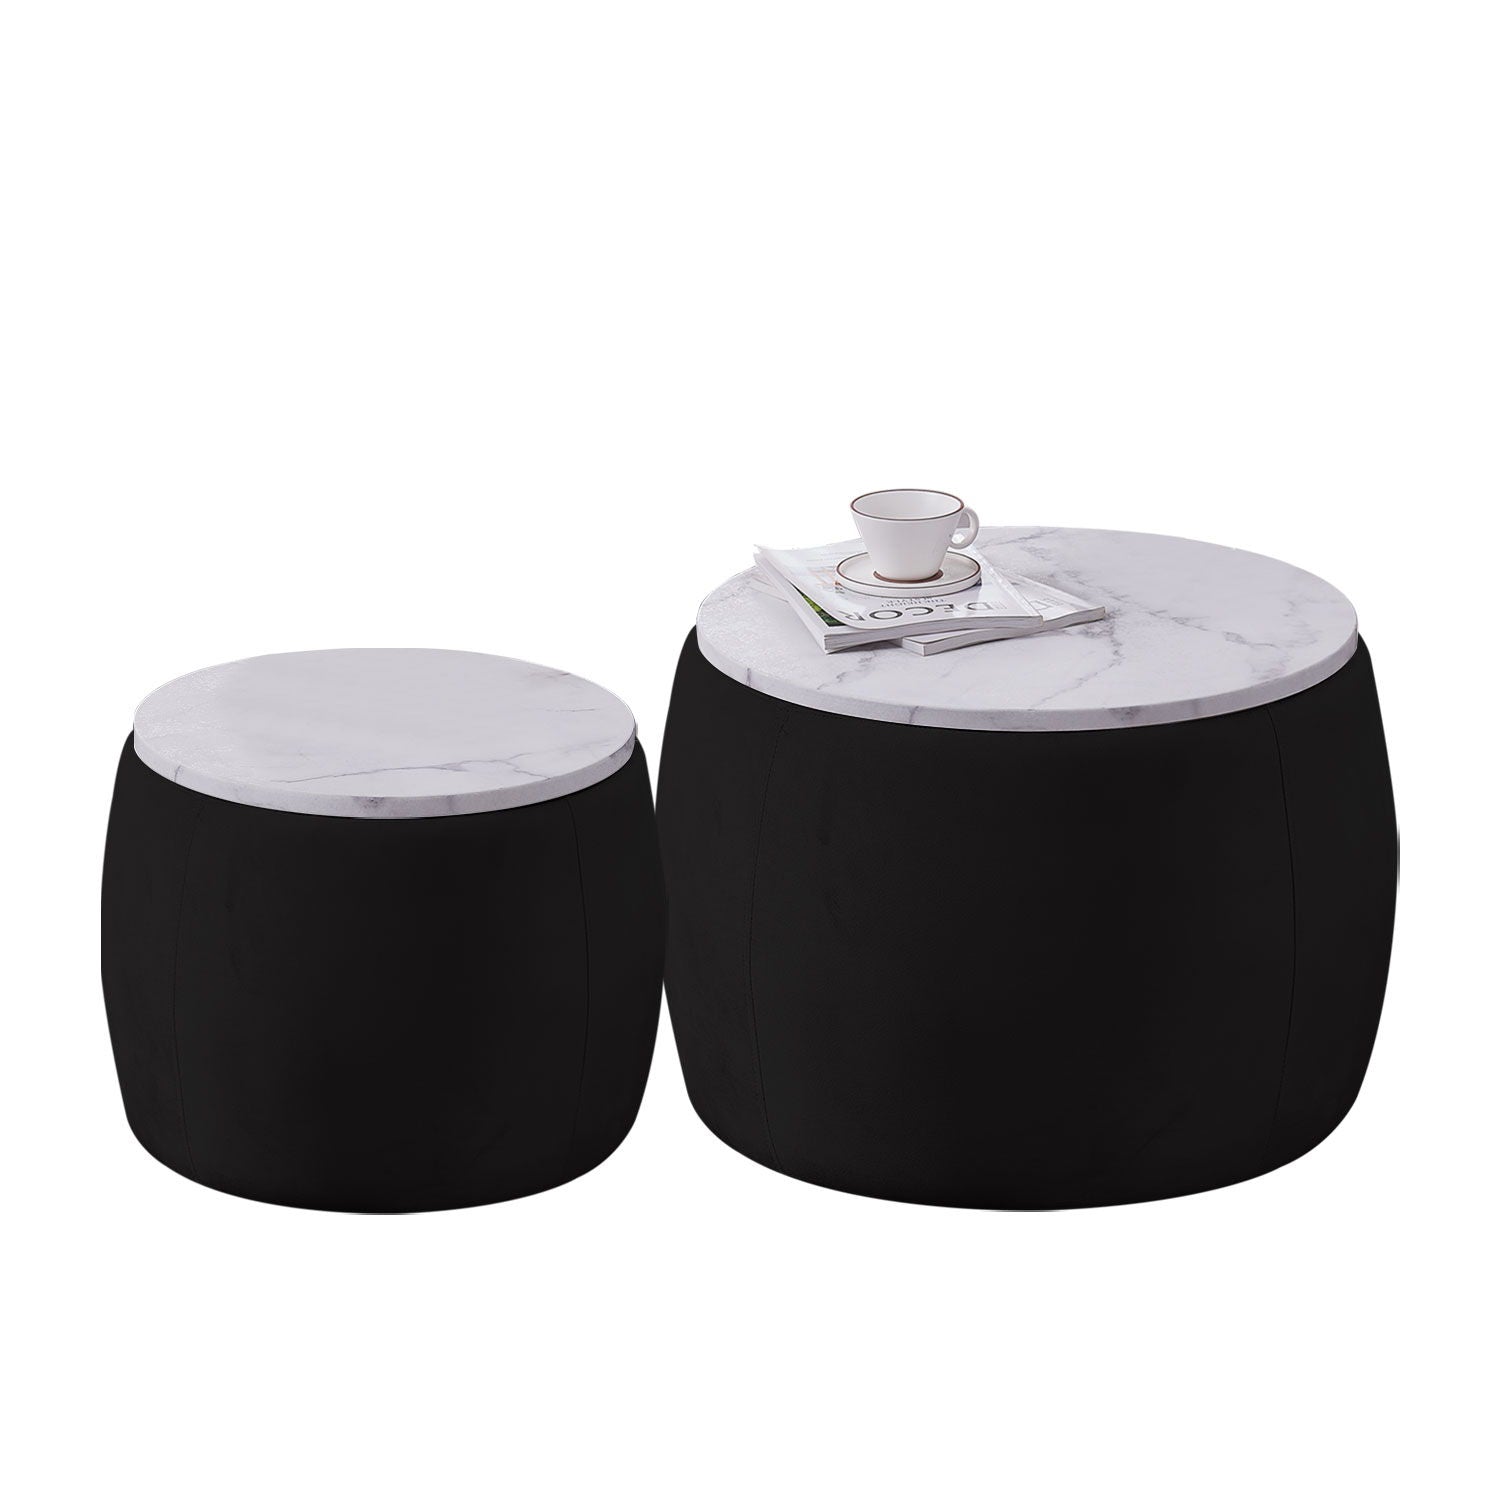 (Set of 2) End Table With Storage, Round Accent Side Table With Removable Top For Living Room, Bedroom, Top 650 x 450, 480 x 390, Black